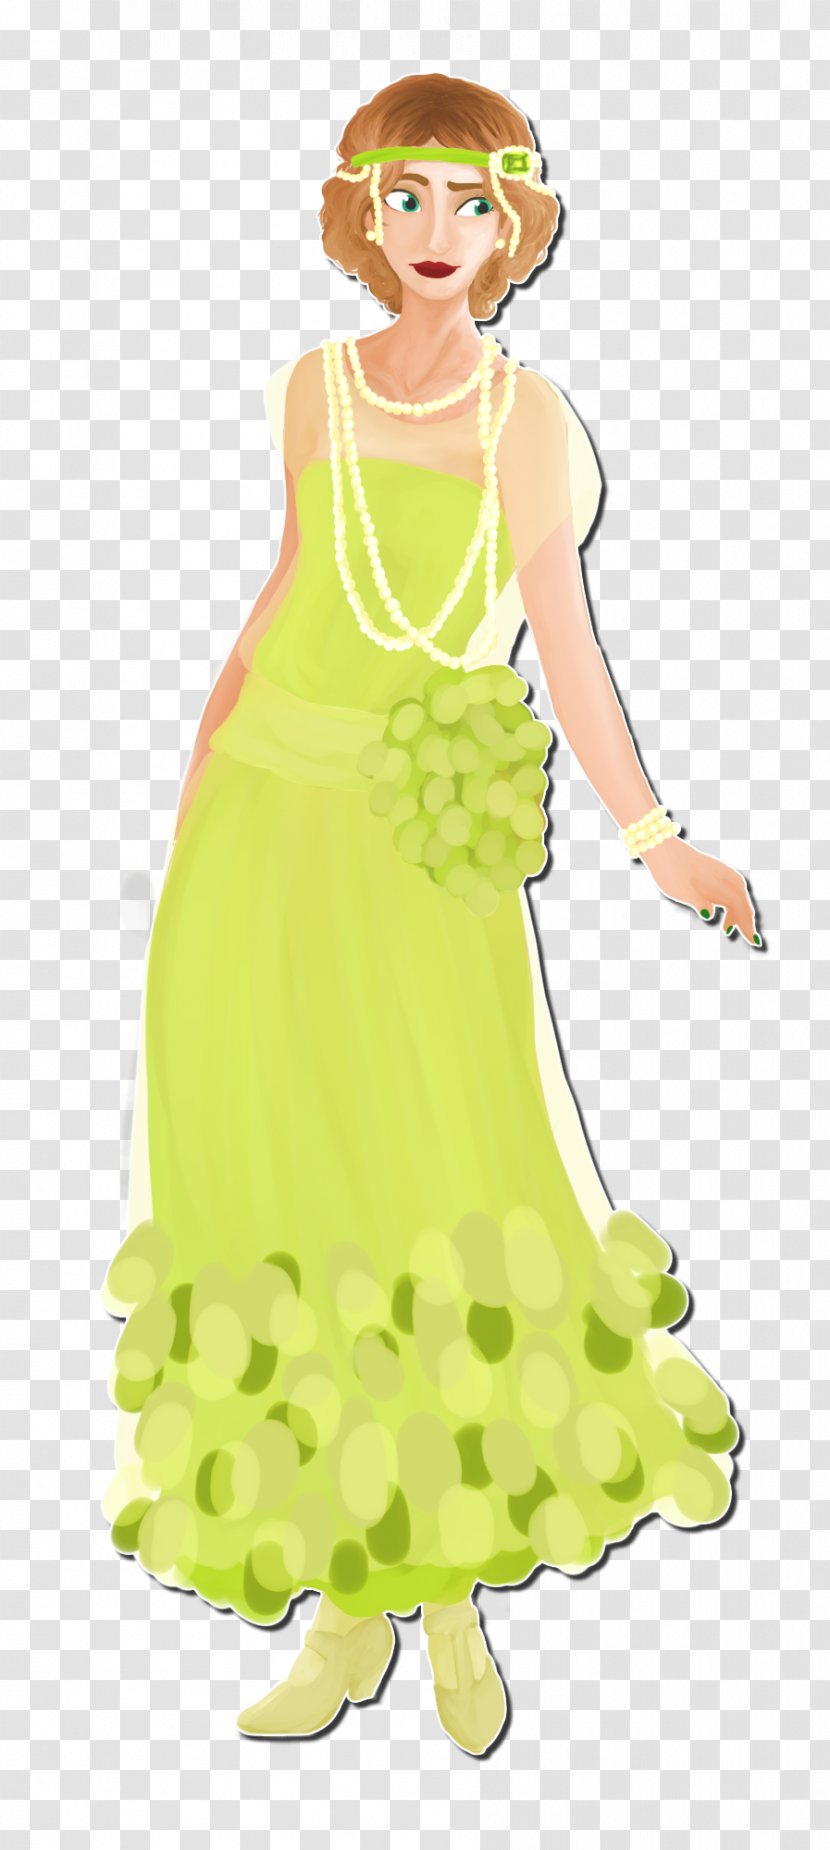 Gown Dress Character Toddler - Silhouette Transparent PNG